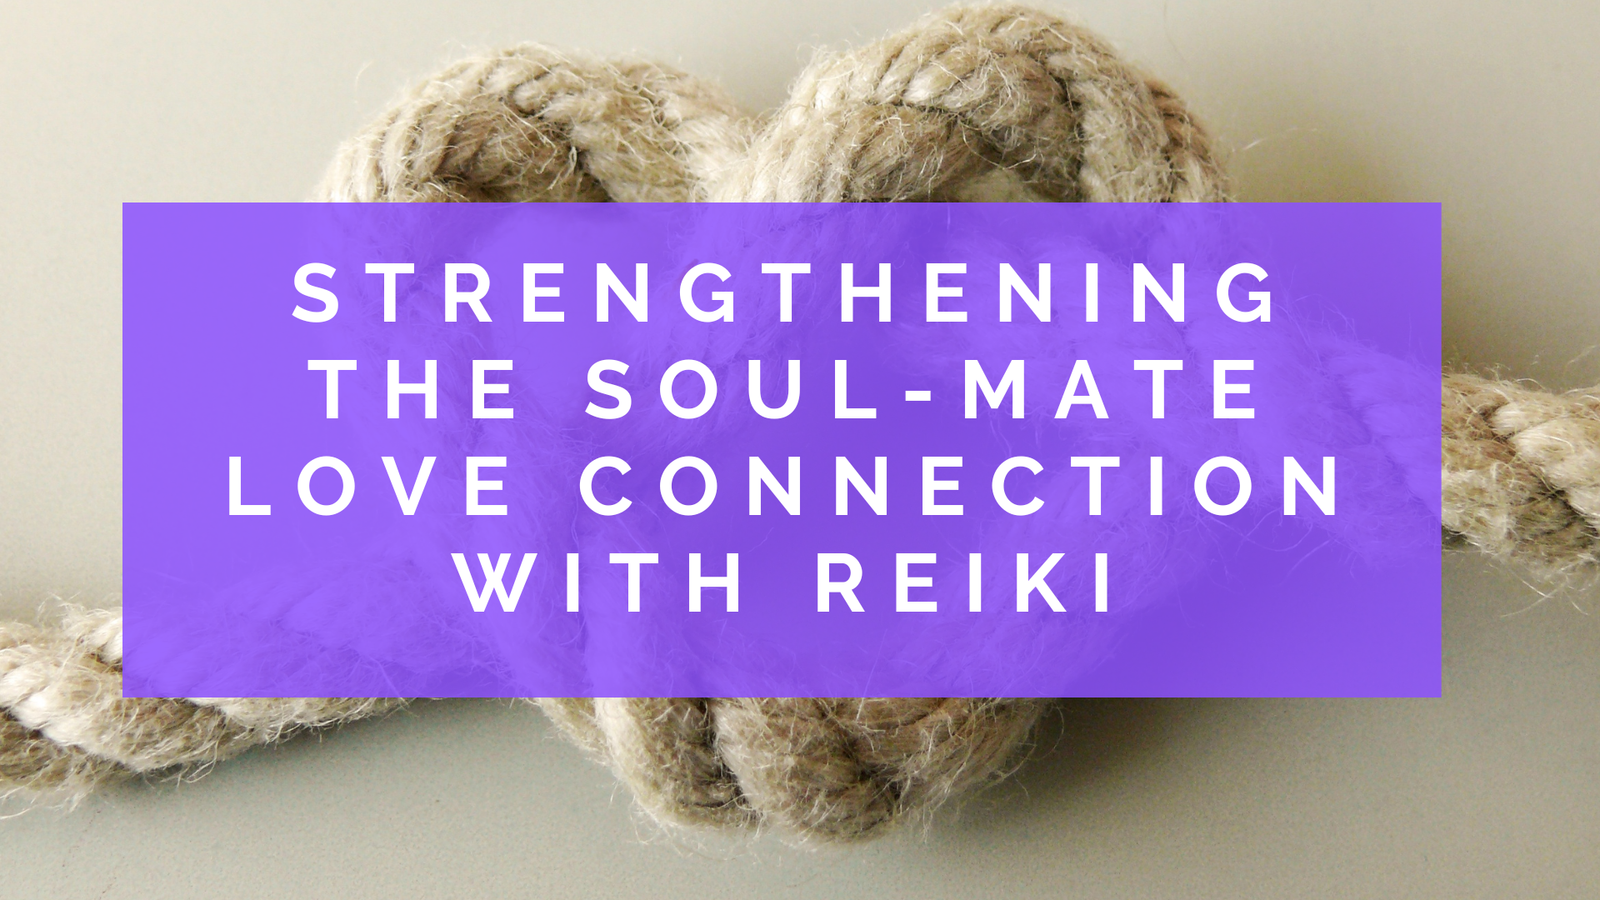 Strengthening the Soul-mate Love Connection with Reiki